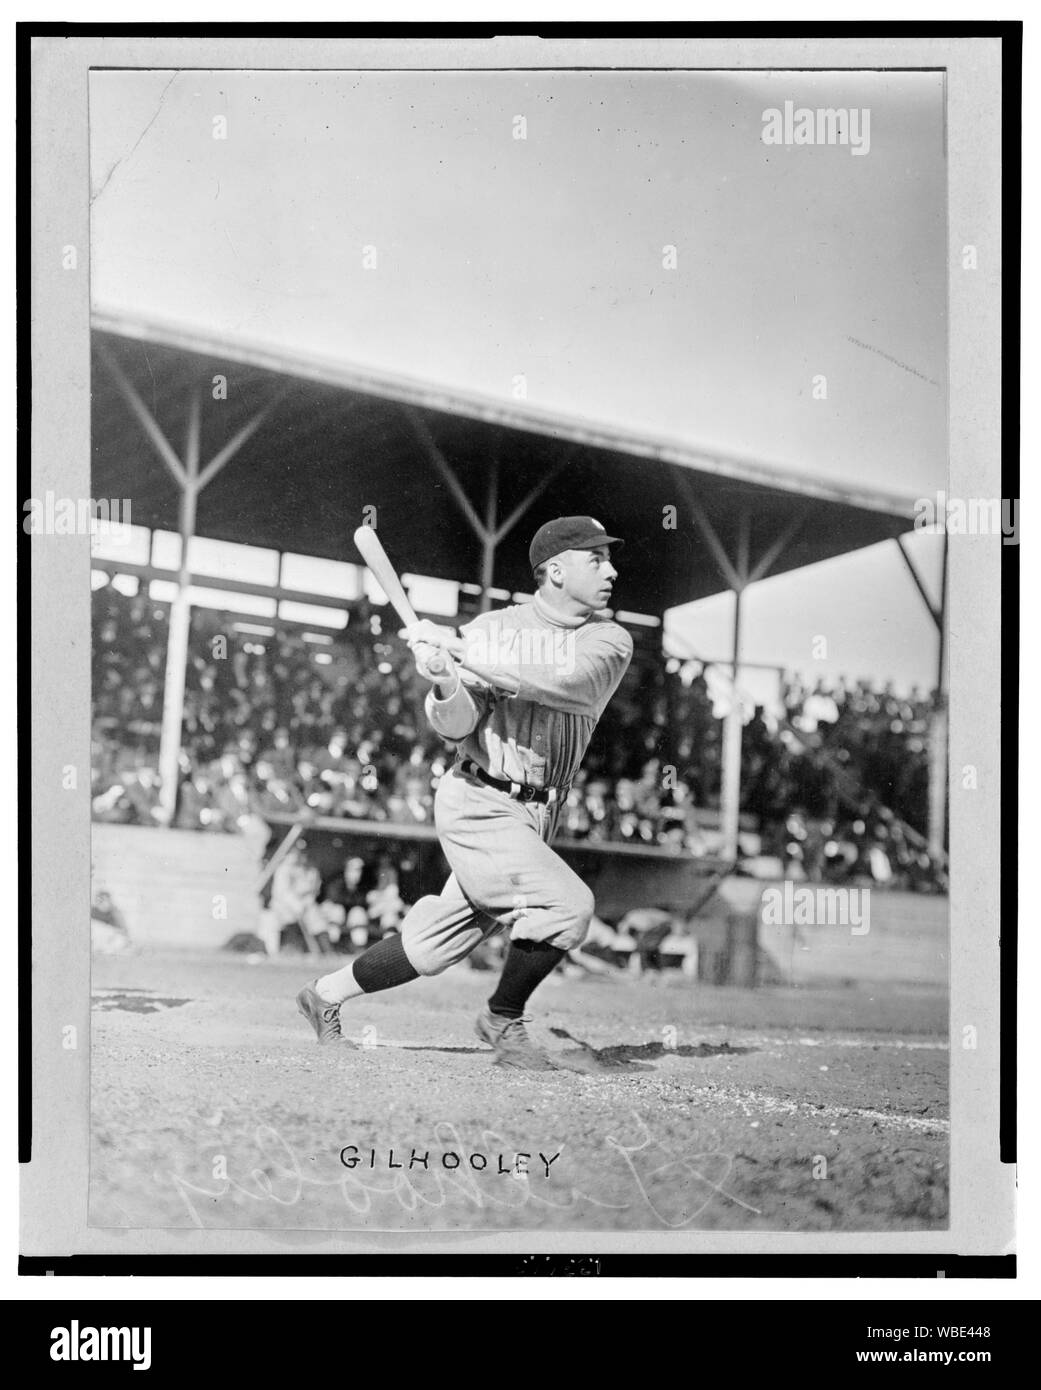 Frank Gilhooley, baseball player with the New York Yankees, swings his bat at home plate Abstract/medium: 1 photographic print. Stock Photo